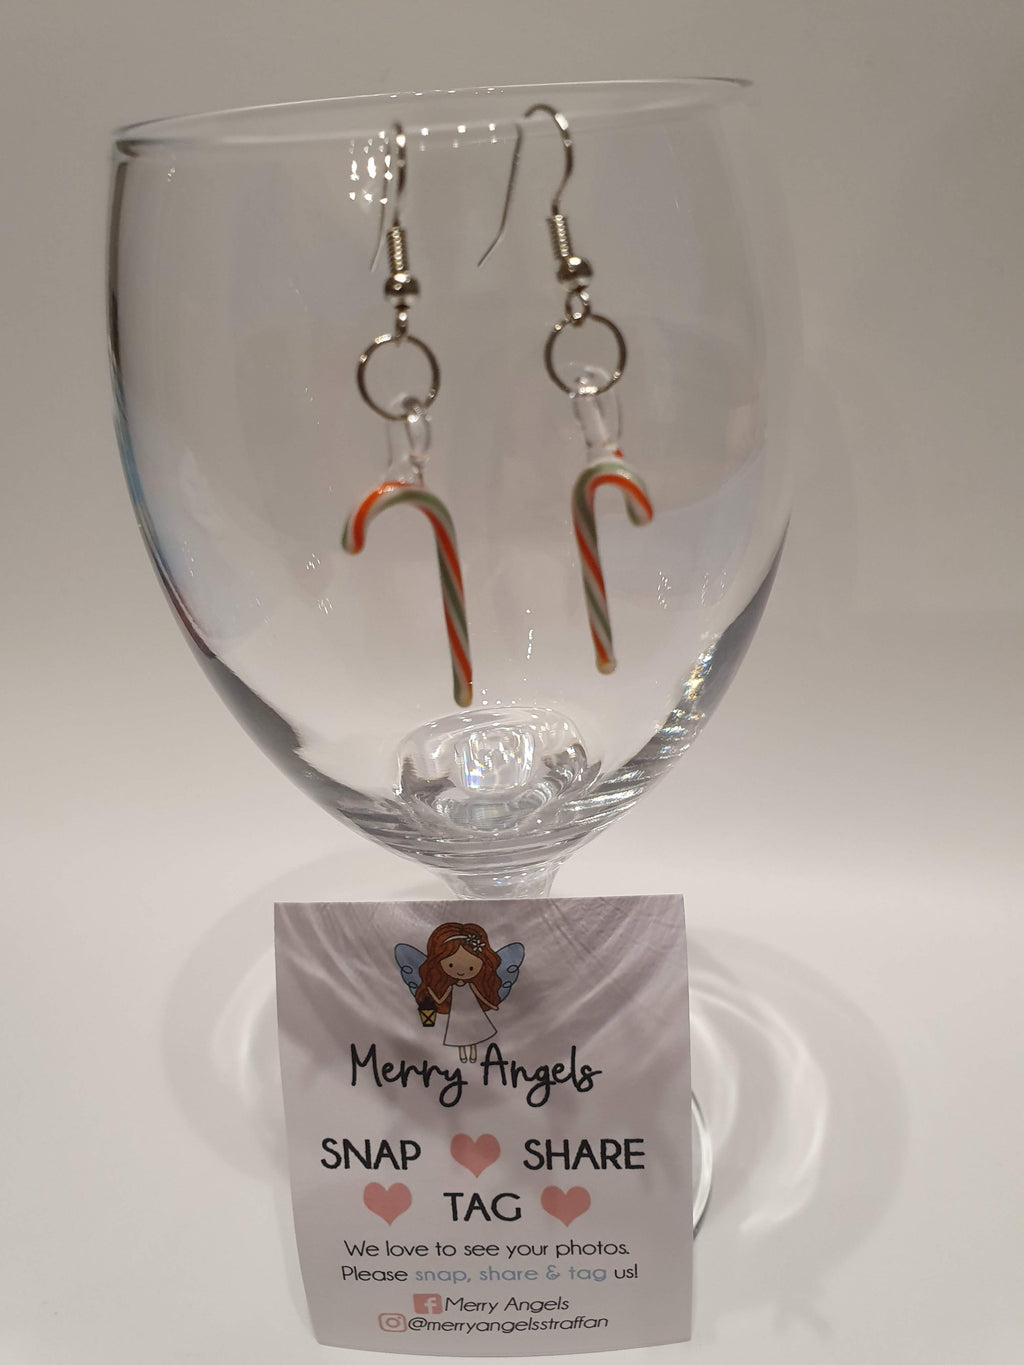 This is a picture of a pair of candy cane earrings hanging over a wine glass 